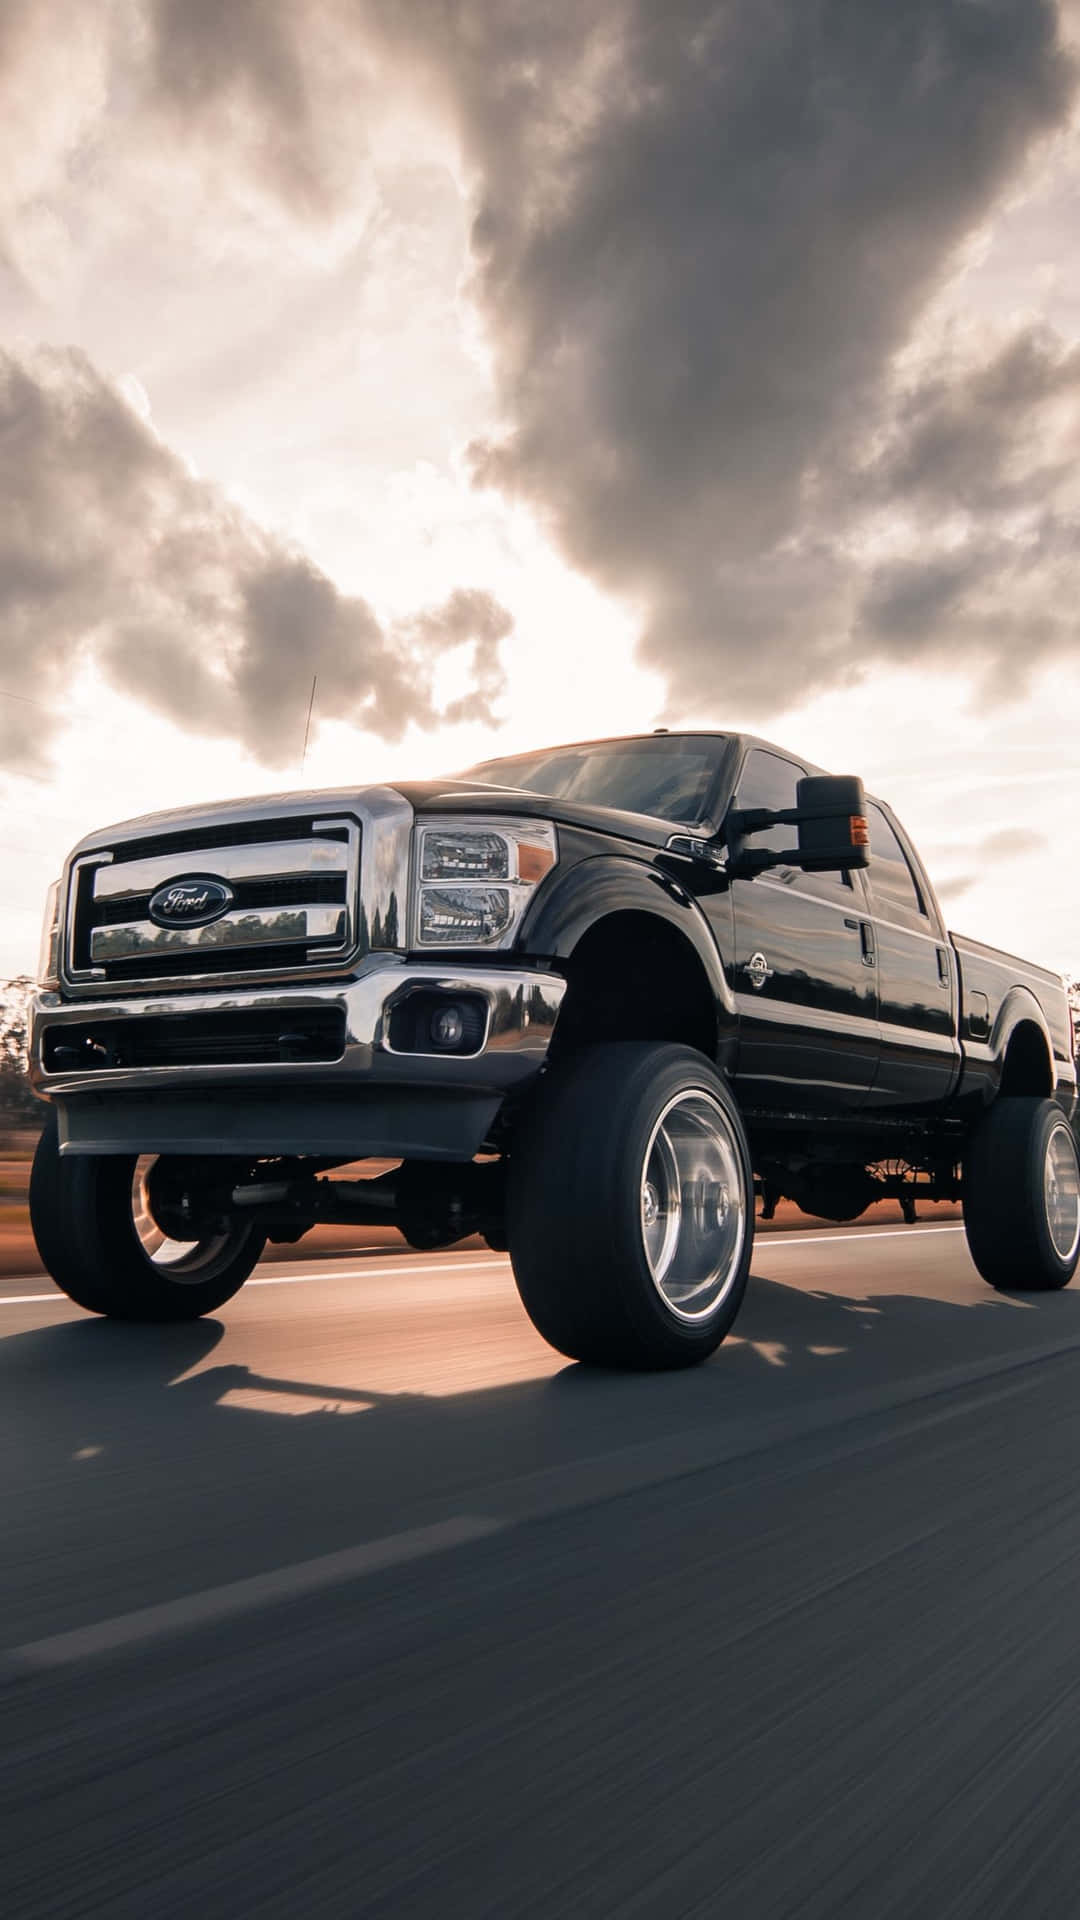 Get Lifted with This Gorgeous Truck Wallpaper